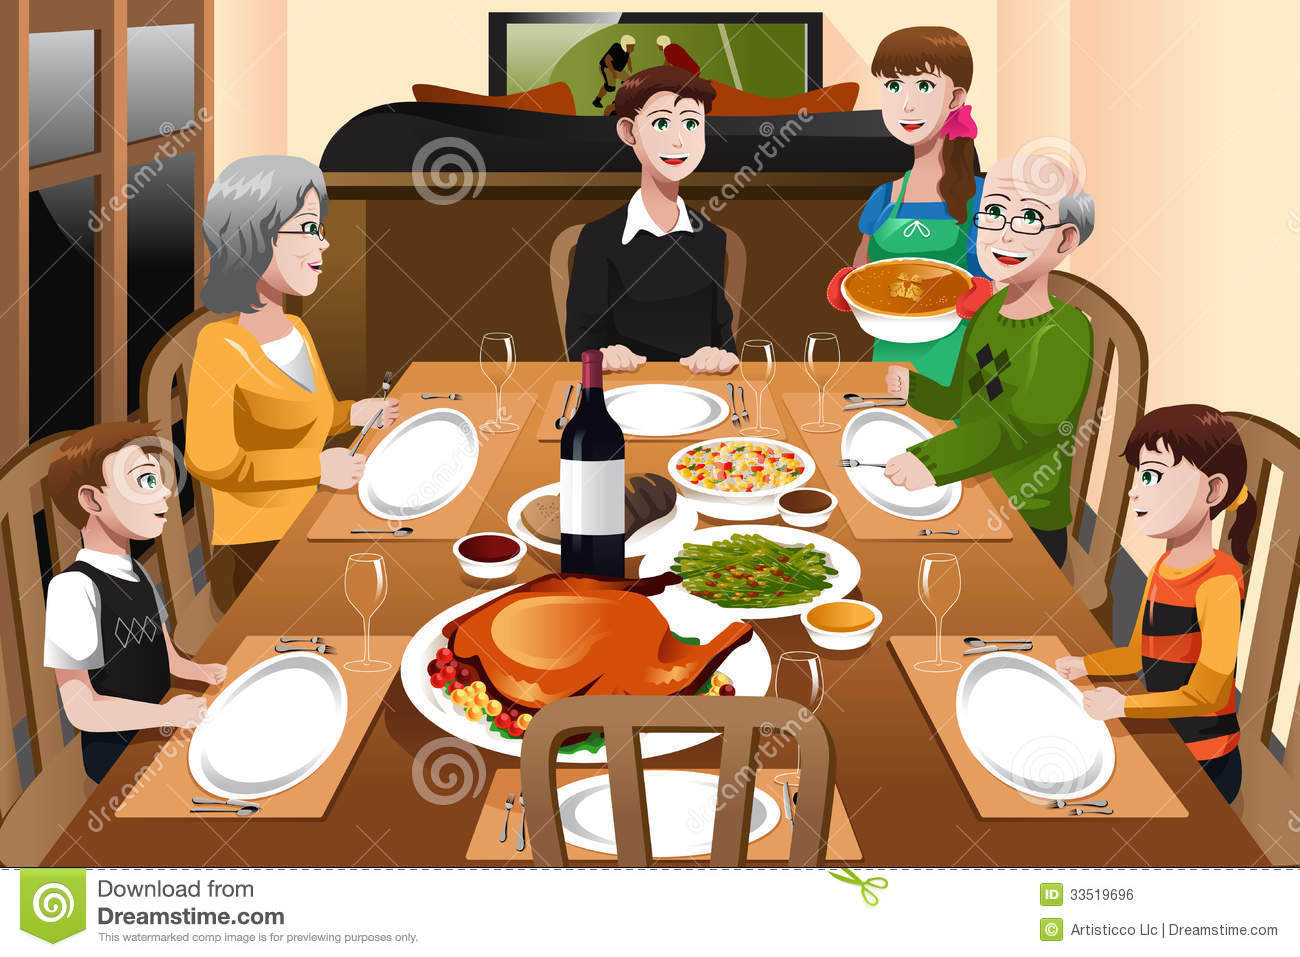 Family Having A Thanksgiving Dinner Royalty Free Stock Image   Image    